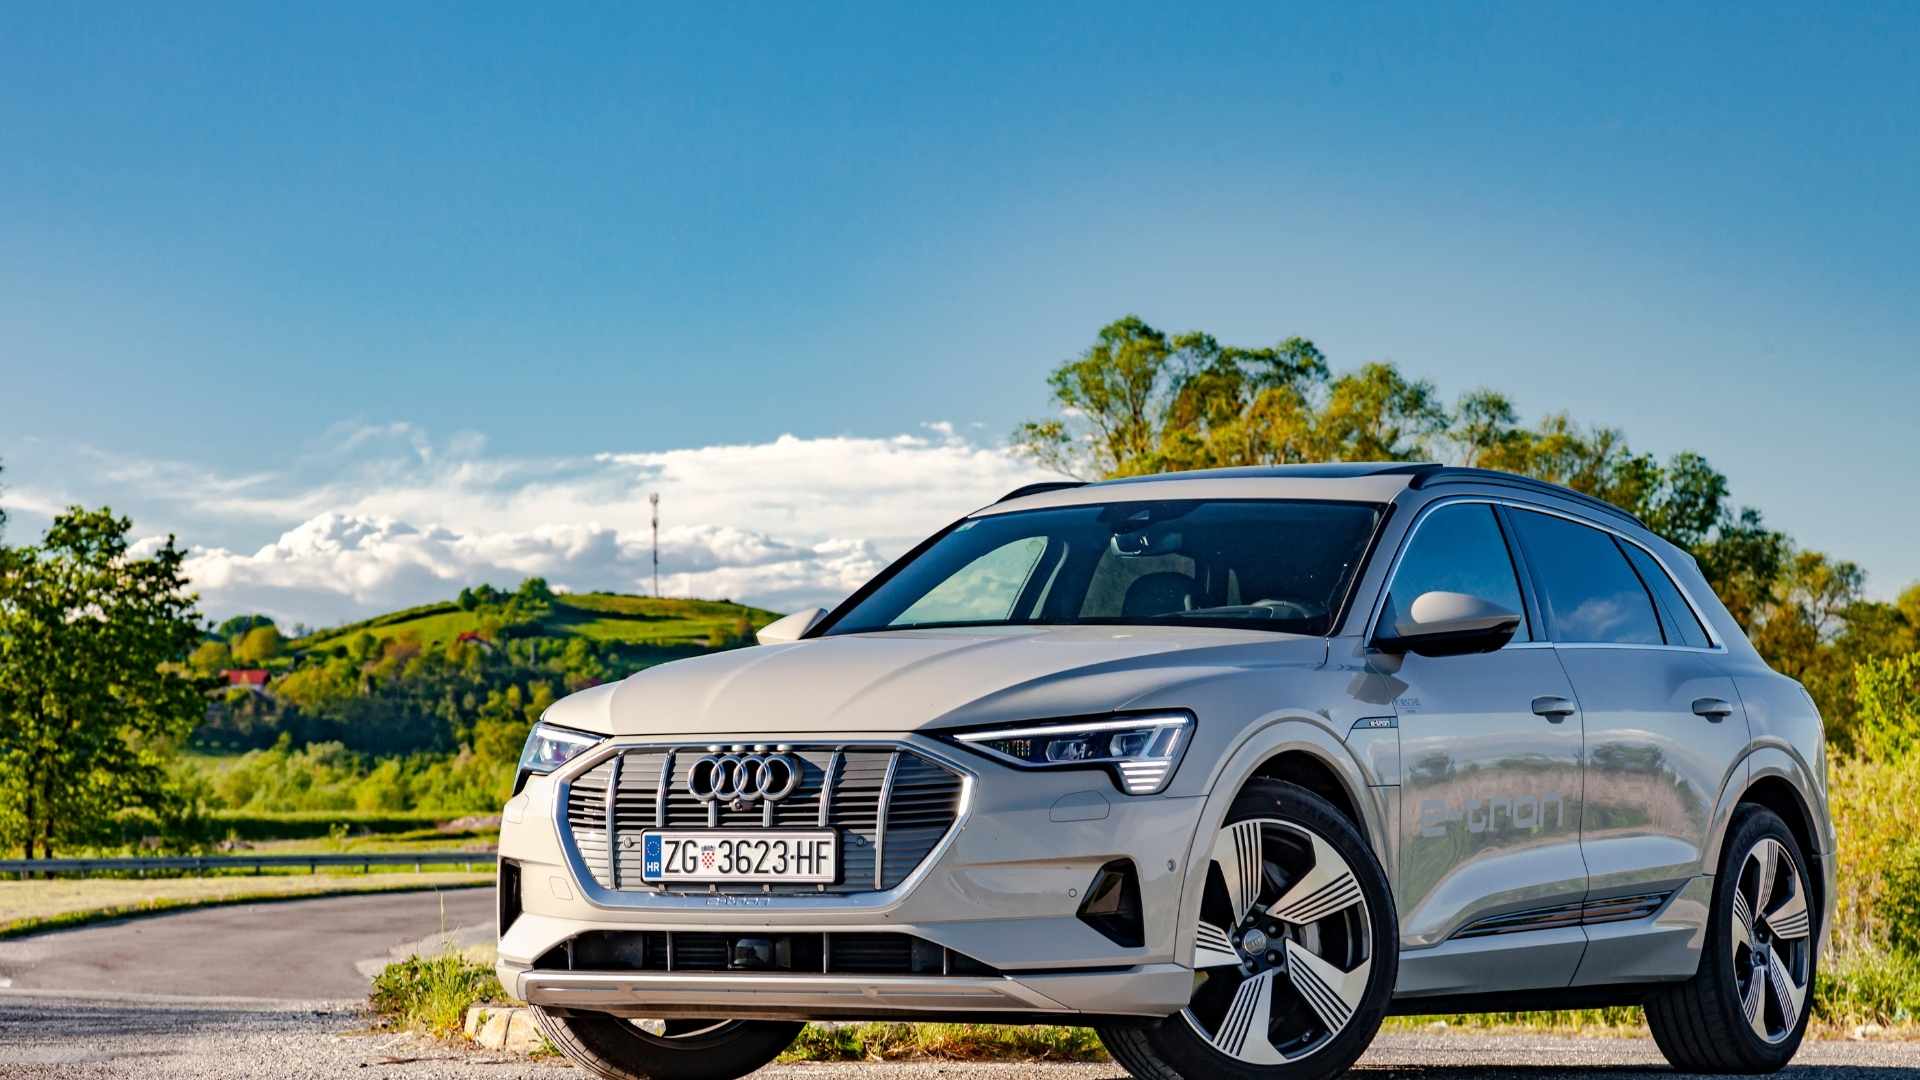 Top 10 Reasons to Consider the Audi e-tron GT as Your Next Electric Vehicle